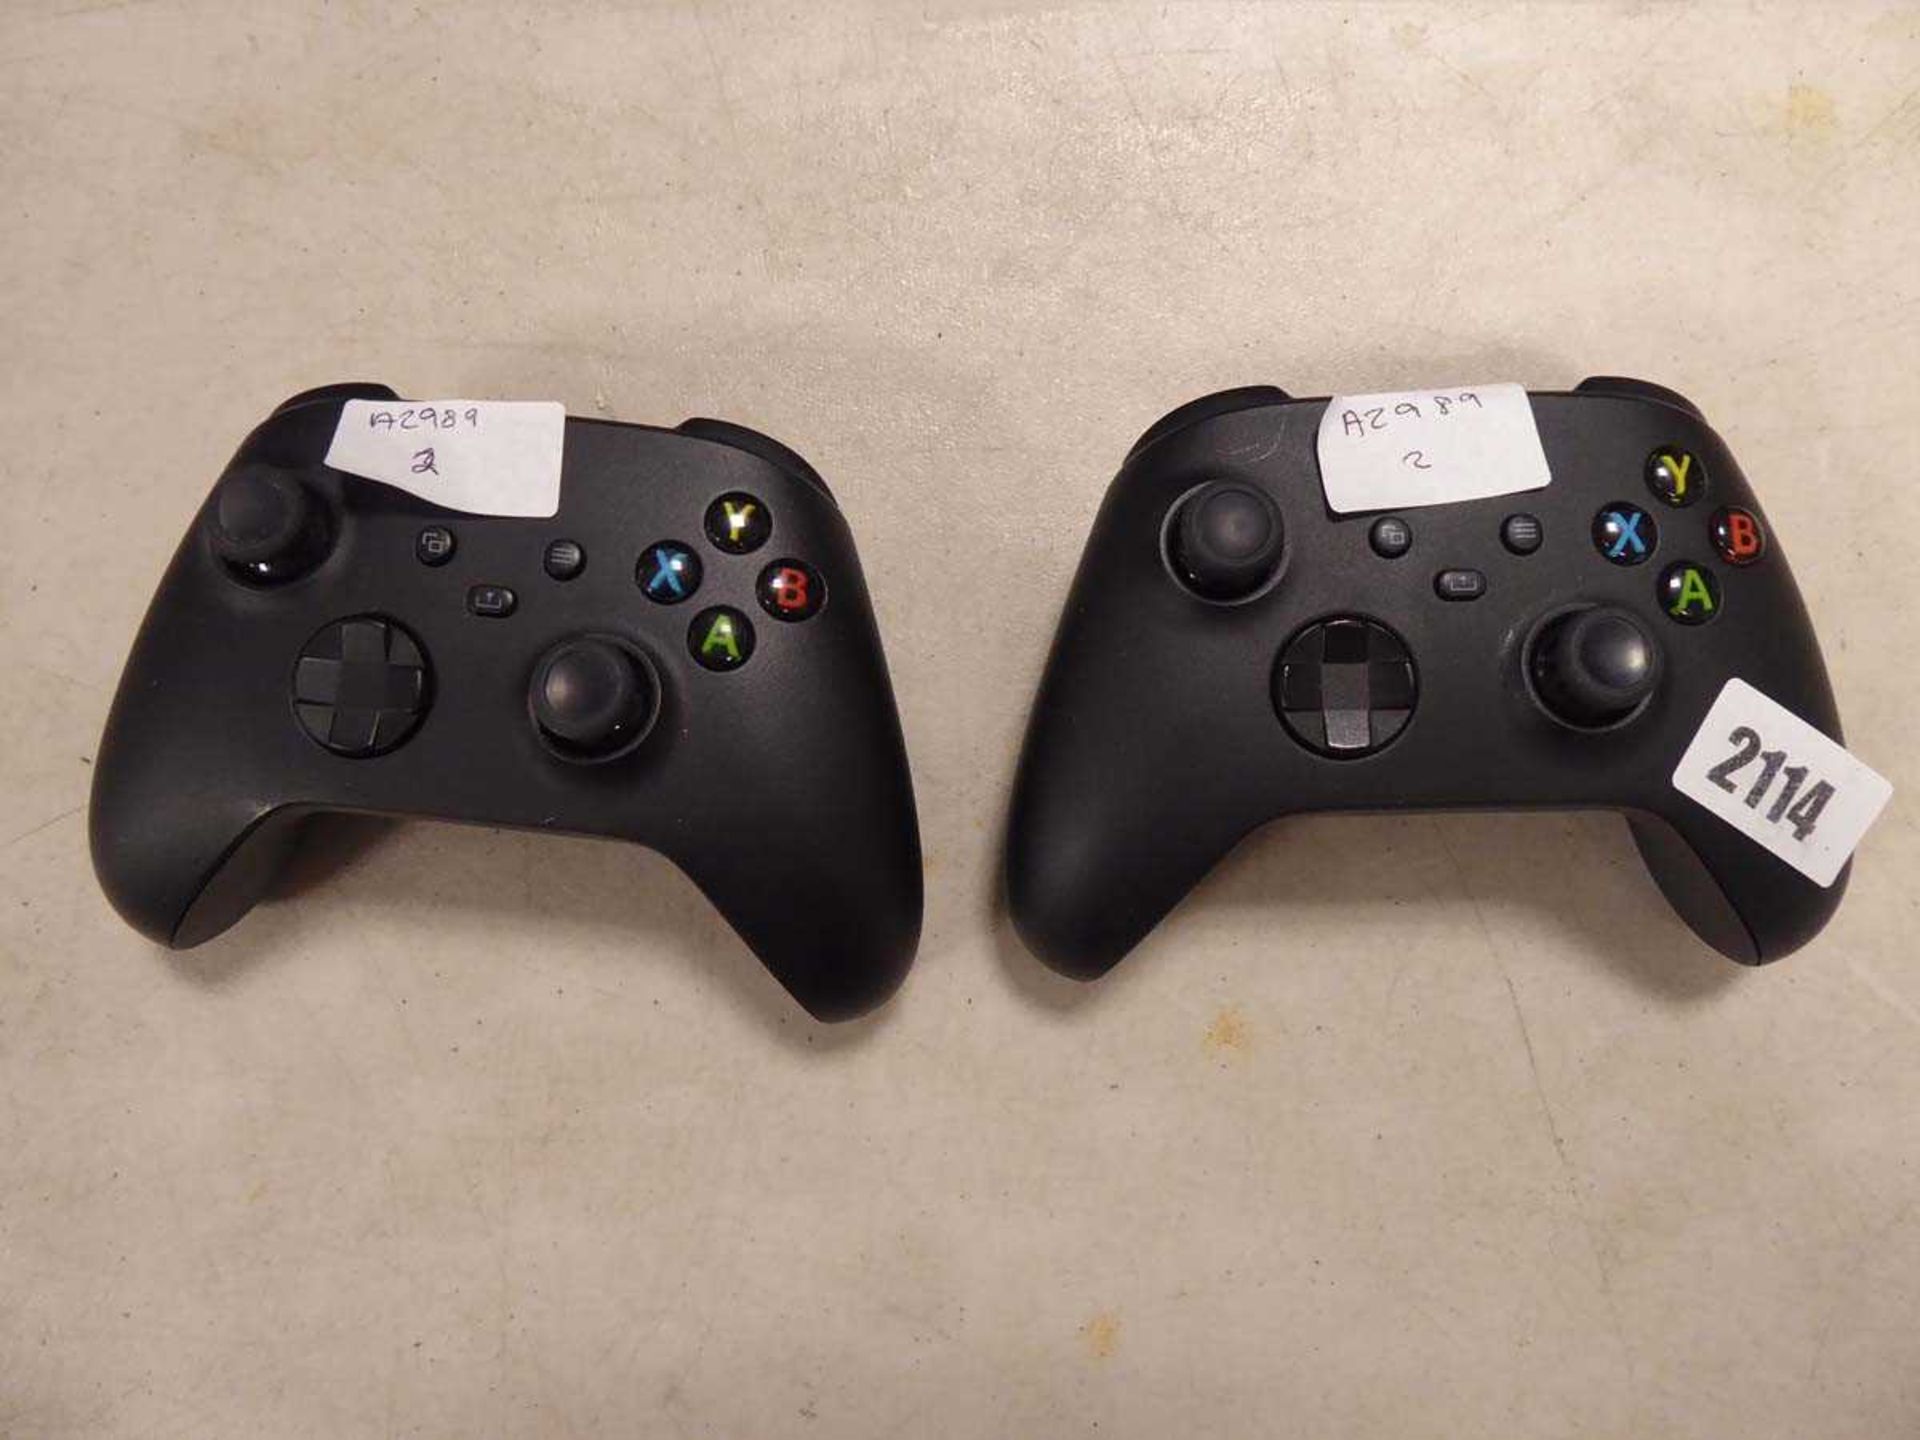 2 loose Xbox controllers